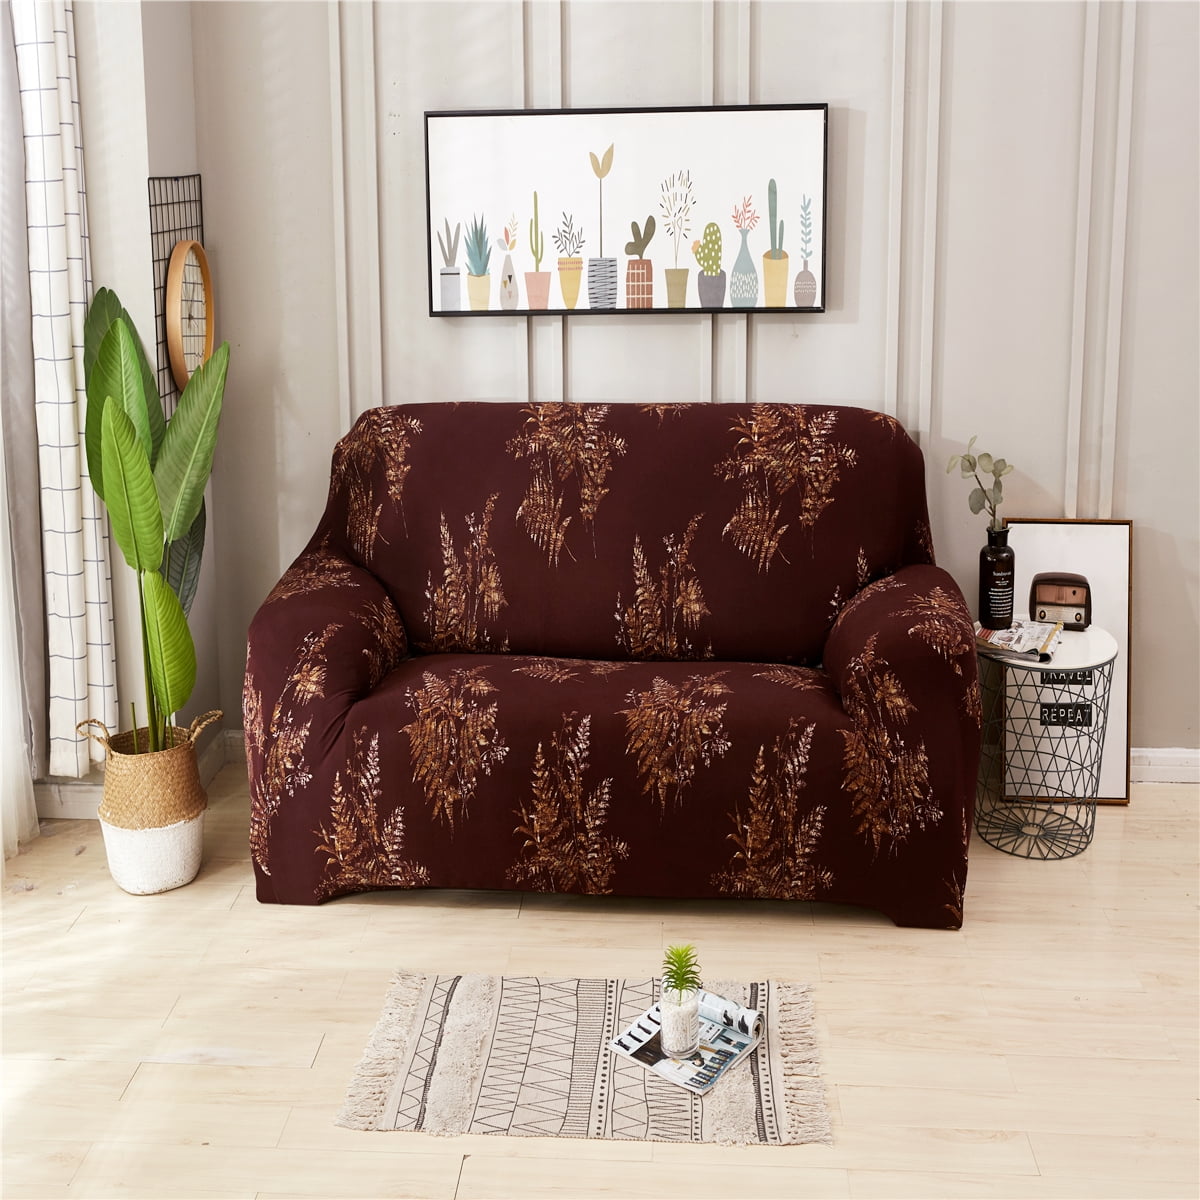 Details about   1/2/3/4Seat Sofa Cover Spandex Stretch Couch Cover Furniture Protector Slipcover 